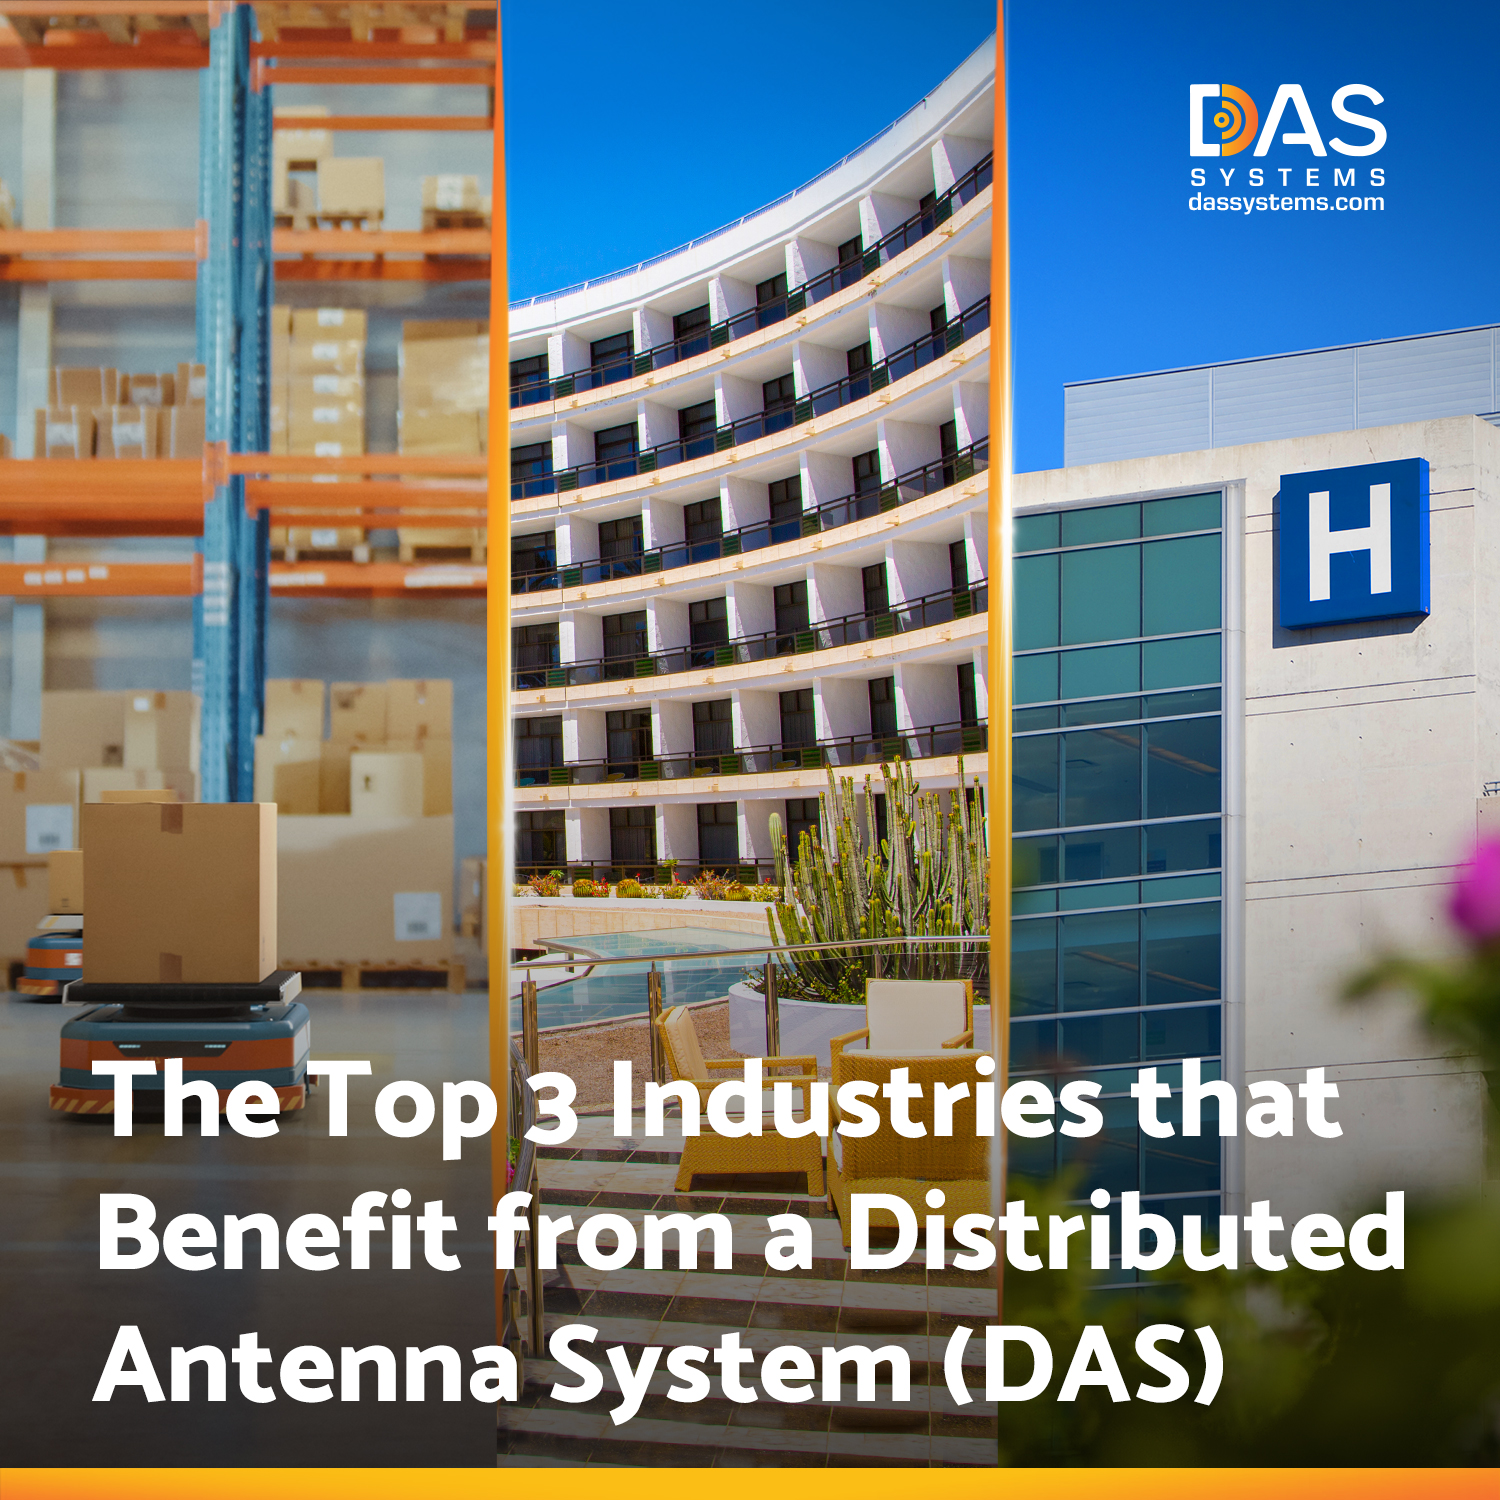 Discover how a Distributed Antenna System (DAS) can revolutionize wireless connectivity in key industries. Contact us for a free consultation.